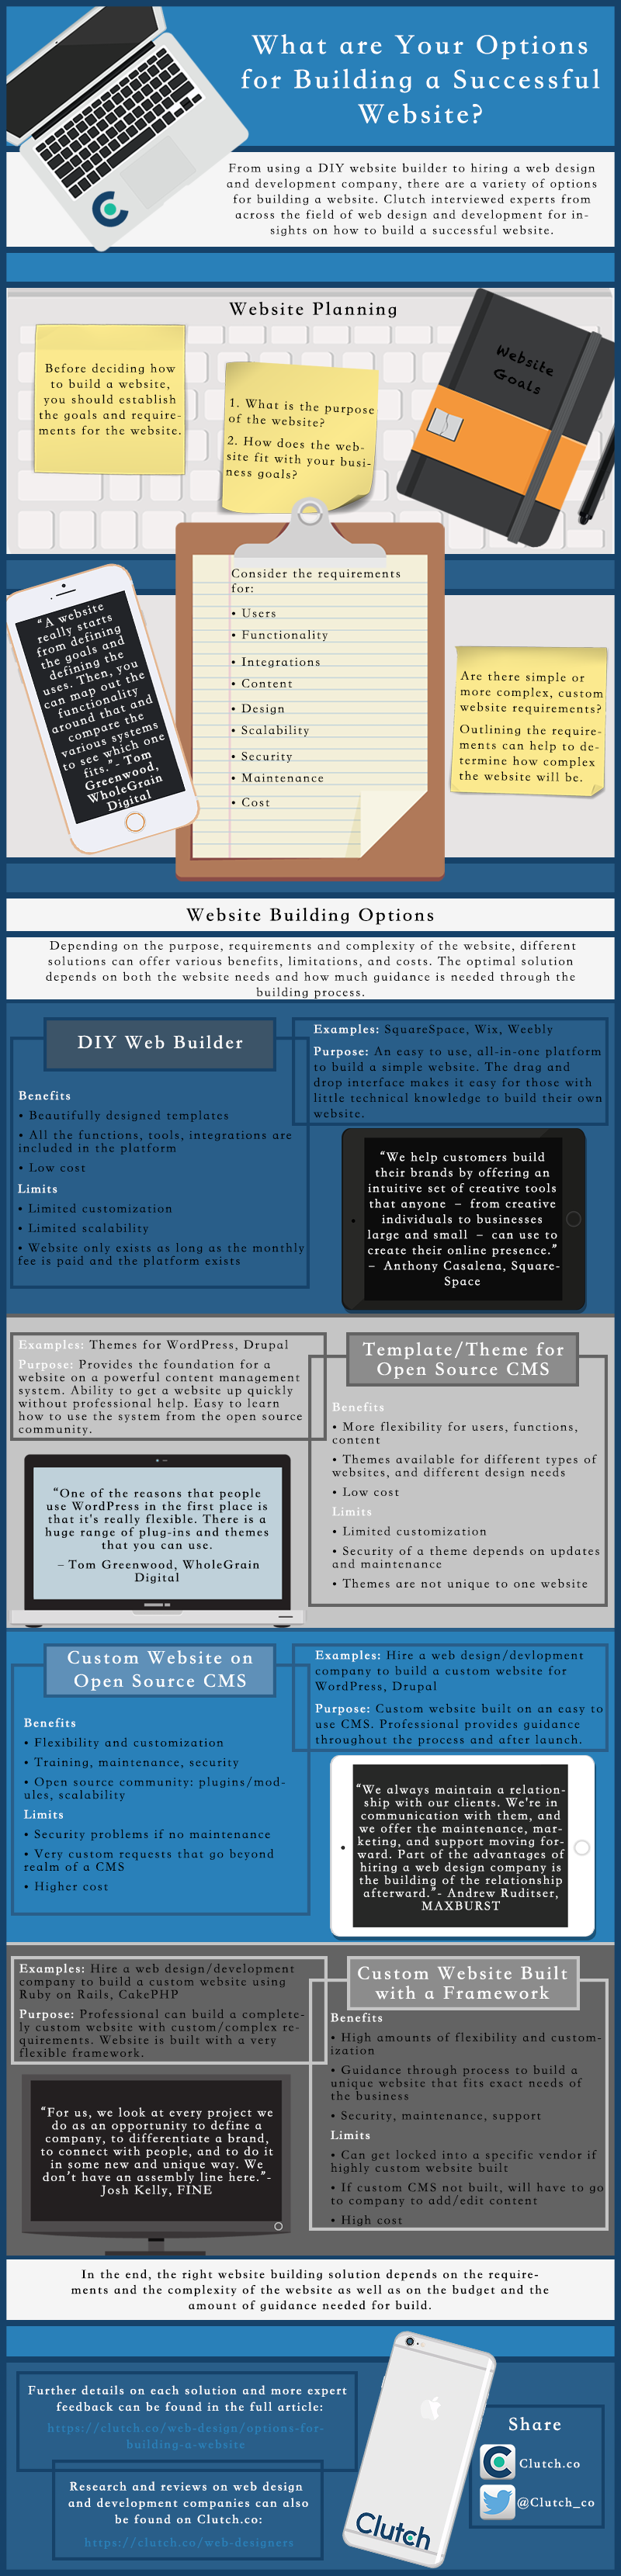 Options for building a website infographic